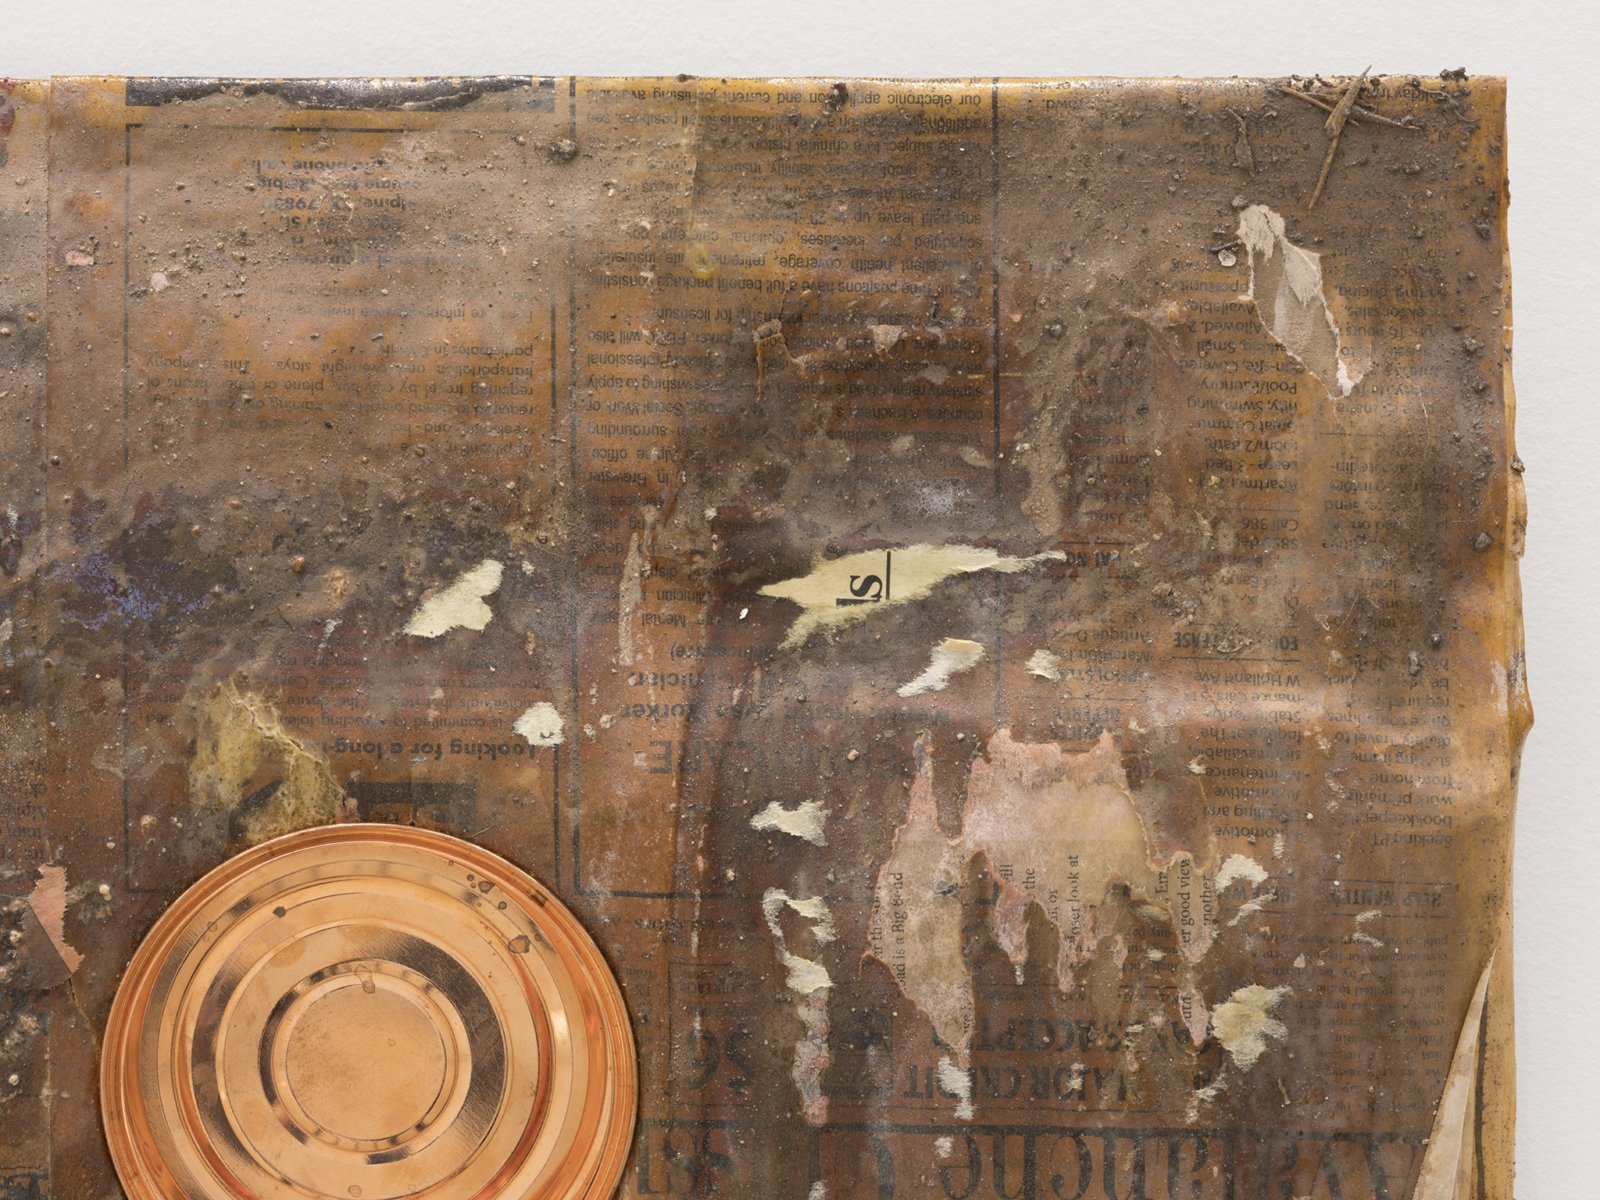 Rochelle Goldberg, Dirty Wall (detail), 2019, newsprint, shellac, copperplated can, dirt from the river, 16 x 18 in. (41 x 45 cm)